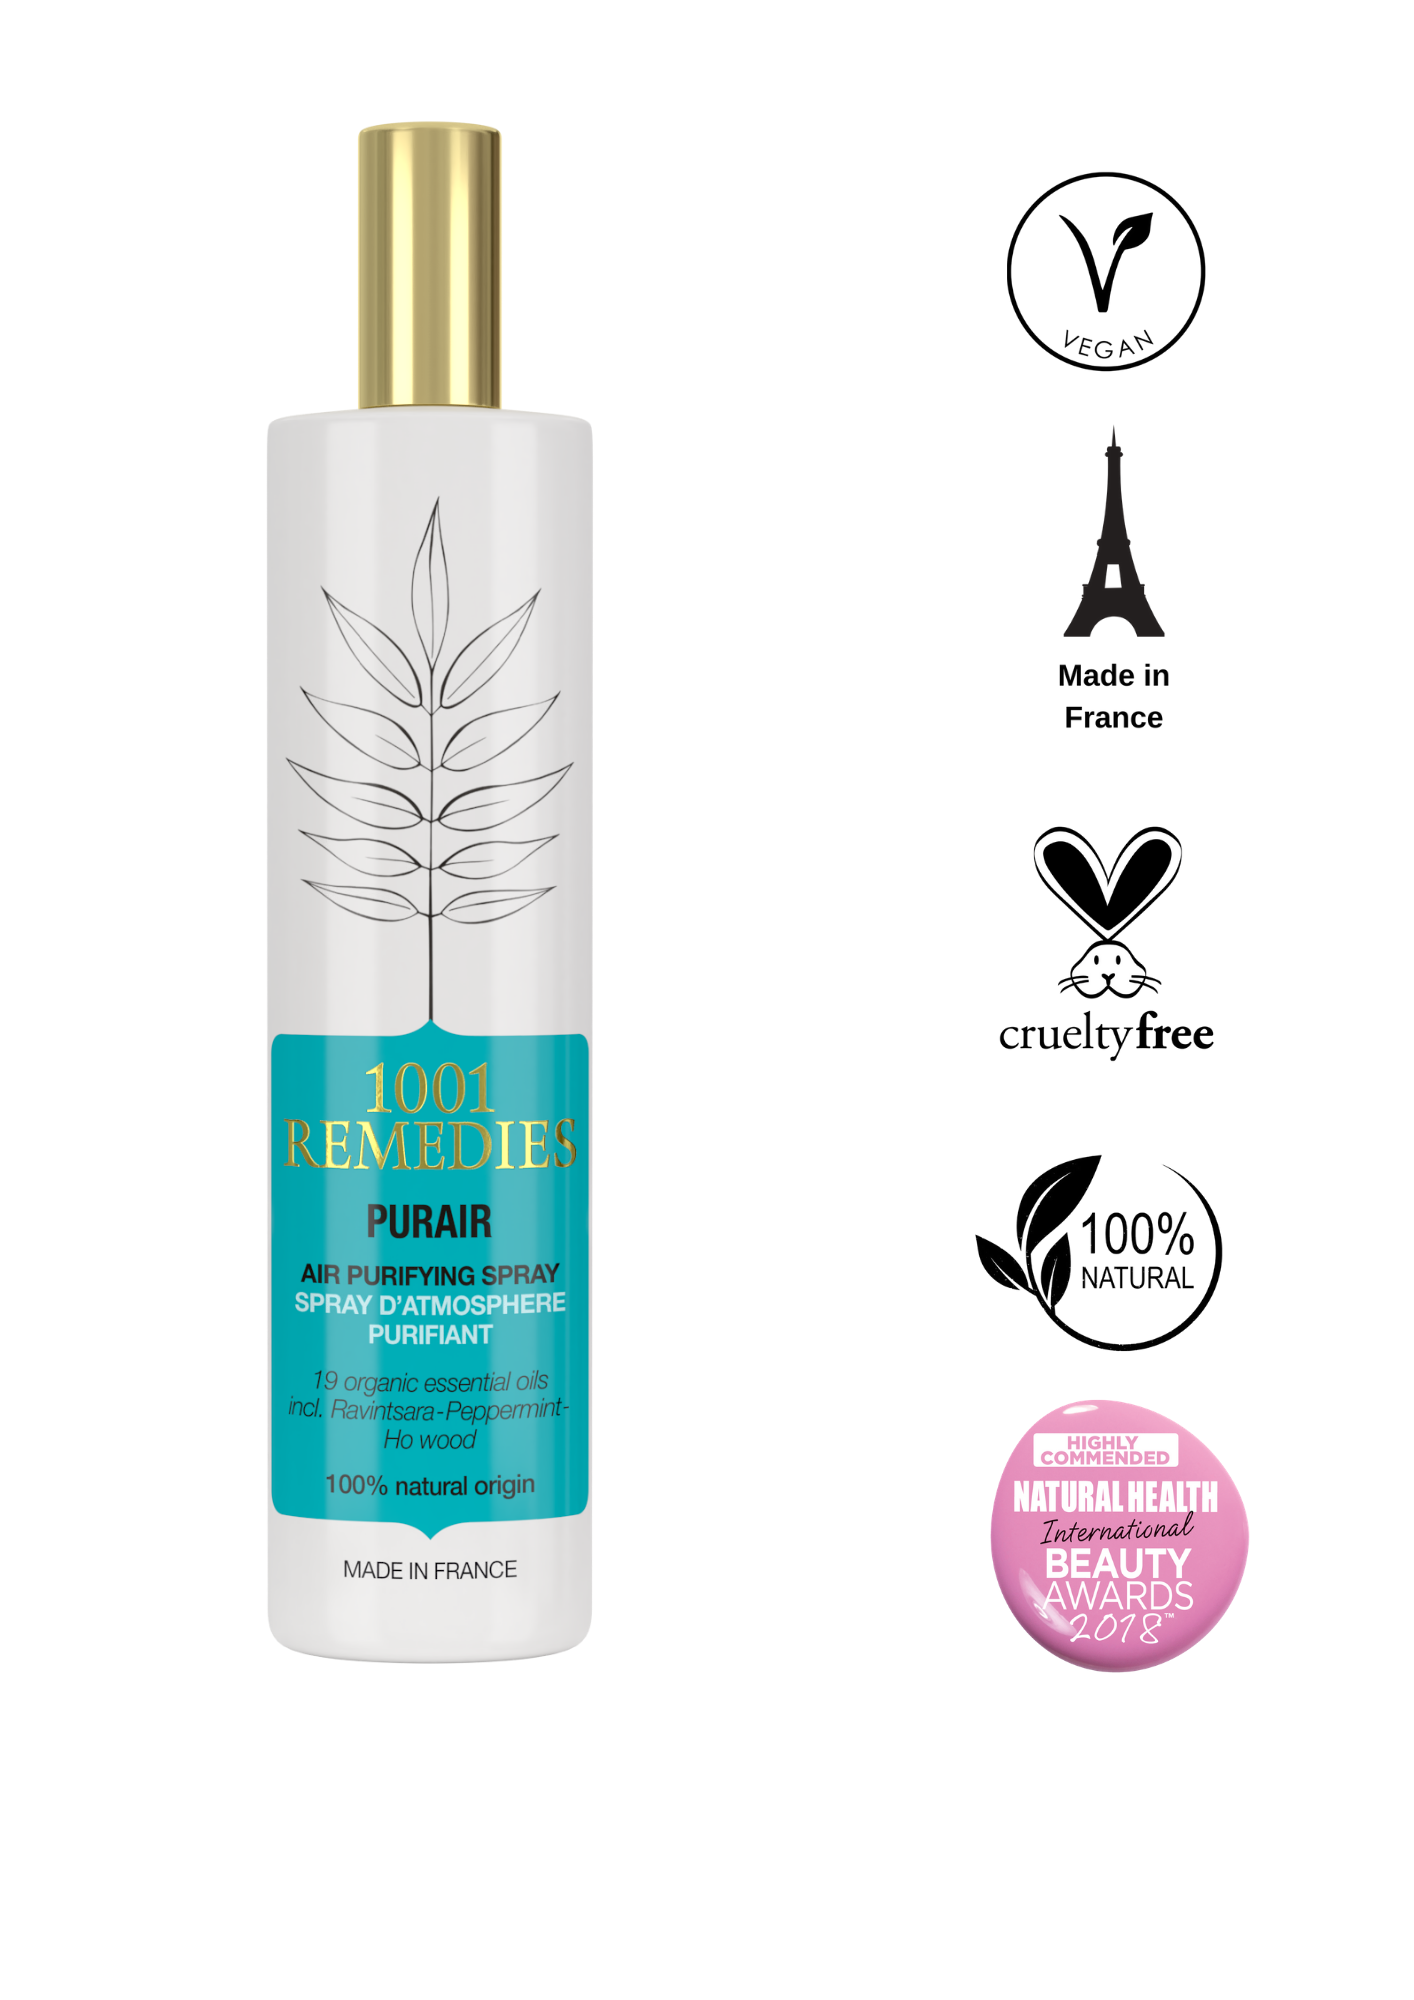 Room Spray | 1001 Remedies| Curelondon.com | Free UK delivery 100% natural and organic aromatherapy air purifying room spray enriched with 19 essential oils, including eucalyptus and lavender. Fill your home with beautiful natural herbal fragrances for a fresh, spa-like atmosphere, whilst boosting your natural defences with this spray's anti-viral and anti-bacterial properties.